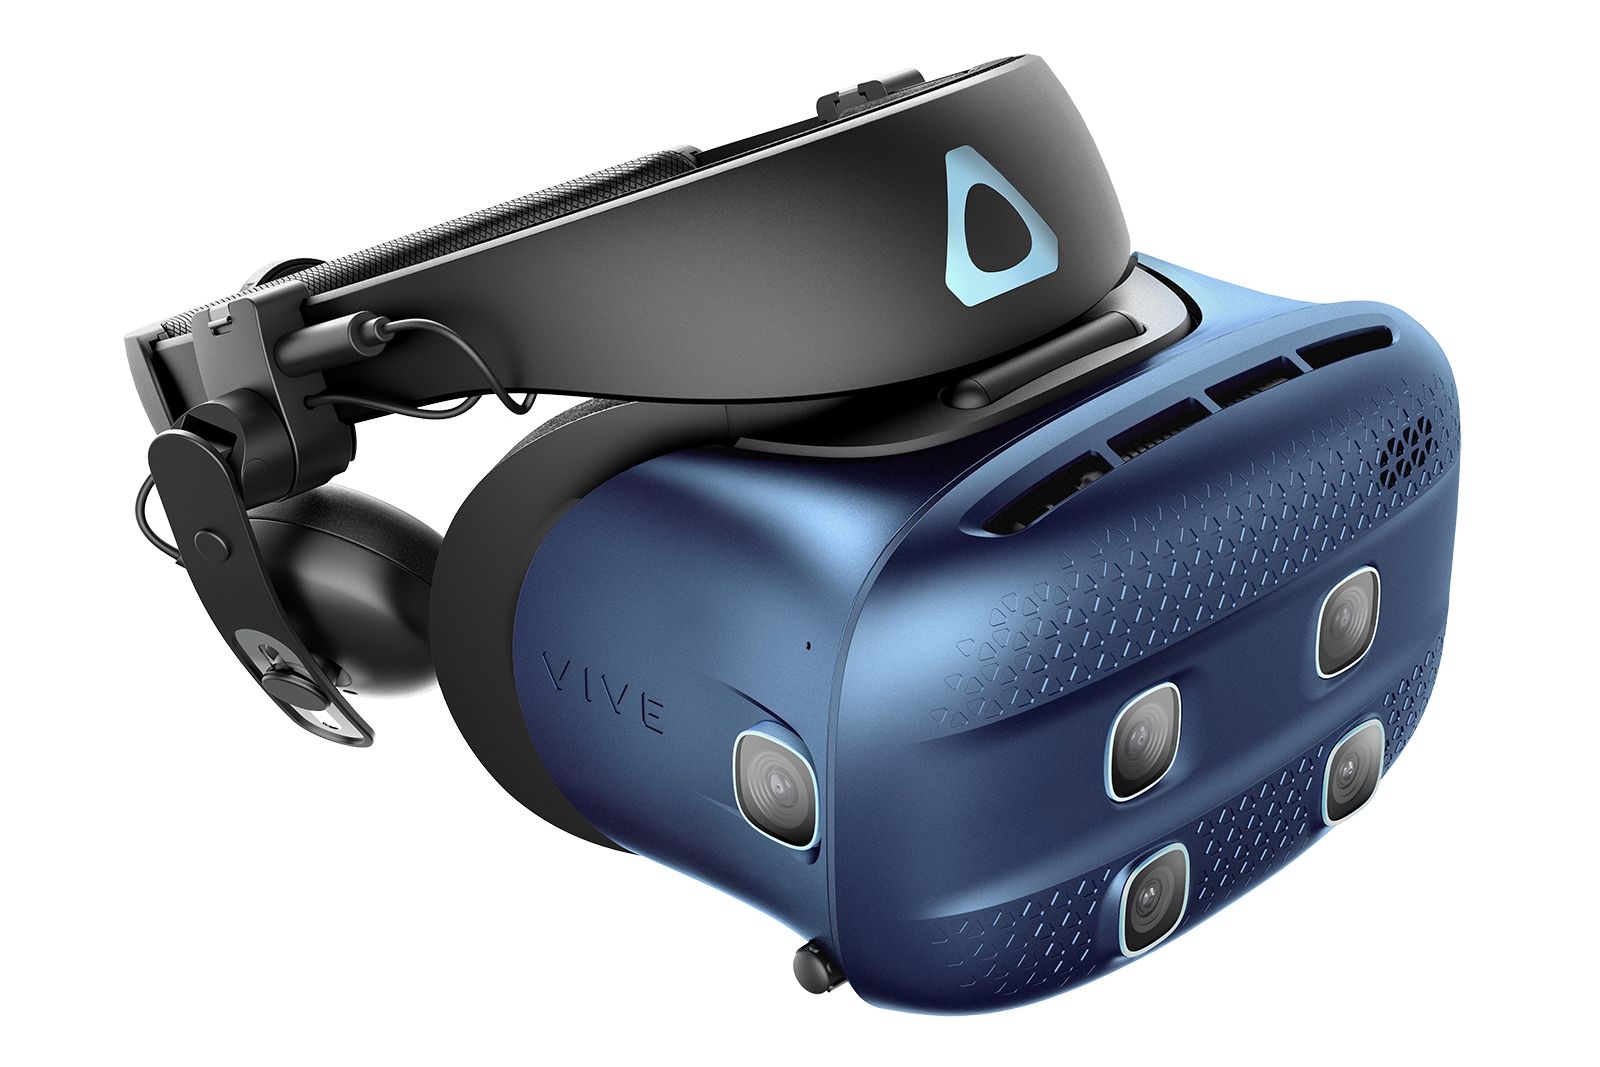 Htc Vive Cosmos Play Cosmos Elite And Cosmos Xr Headsets Added To Vr Range Plus Faceplates To Upgrade image 1